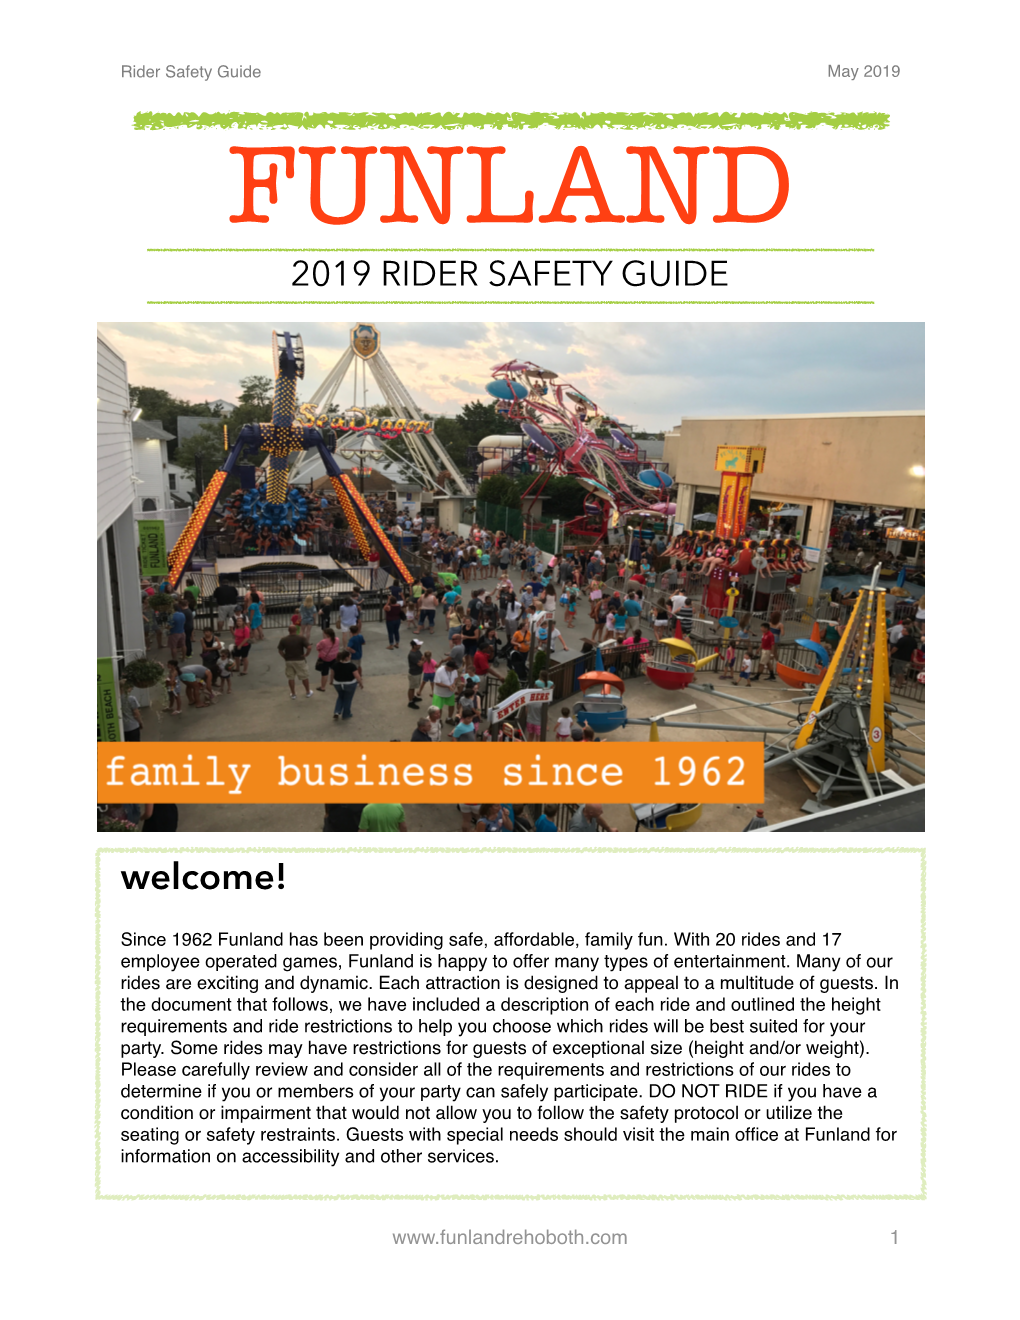 2019 Funland Rider Safety Guide